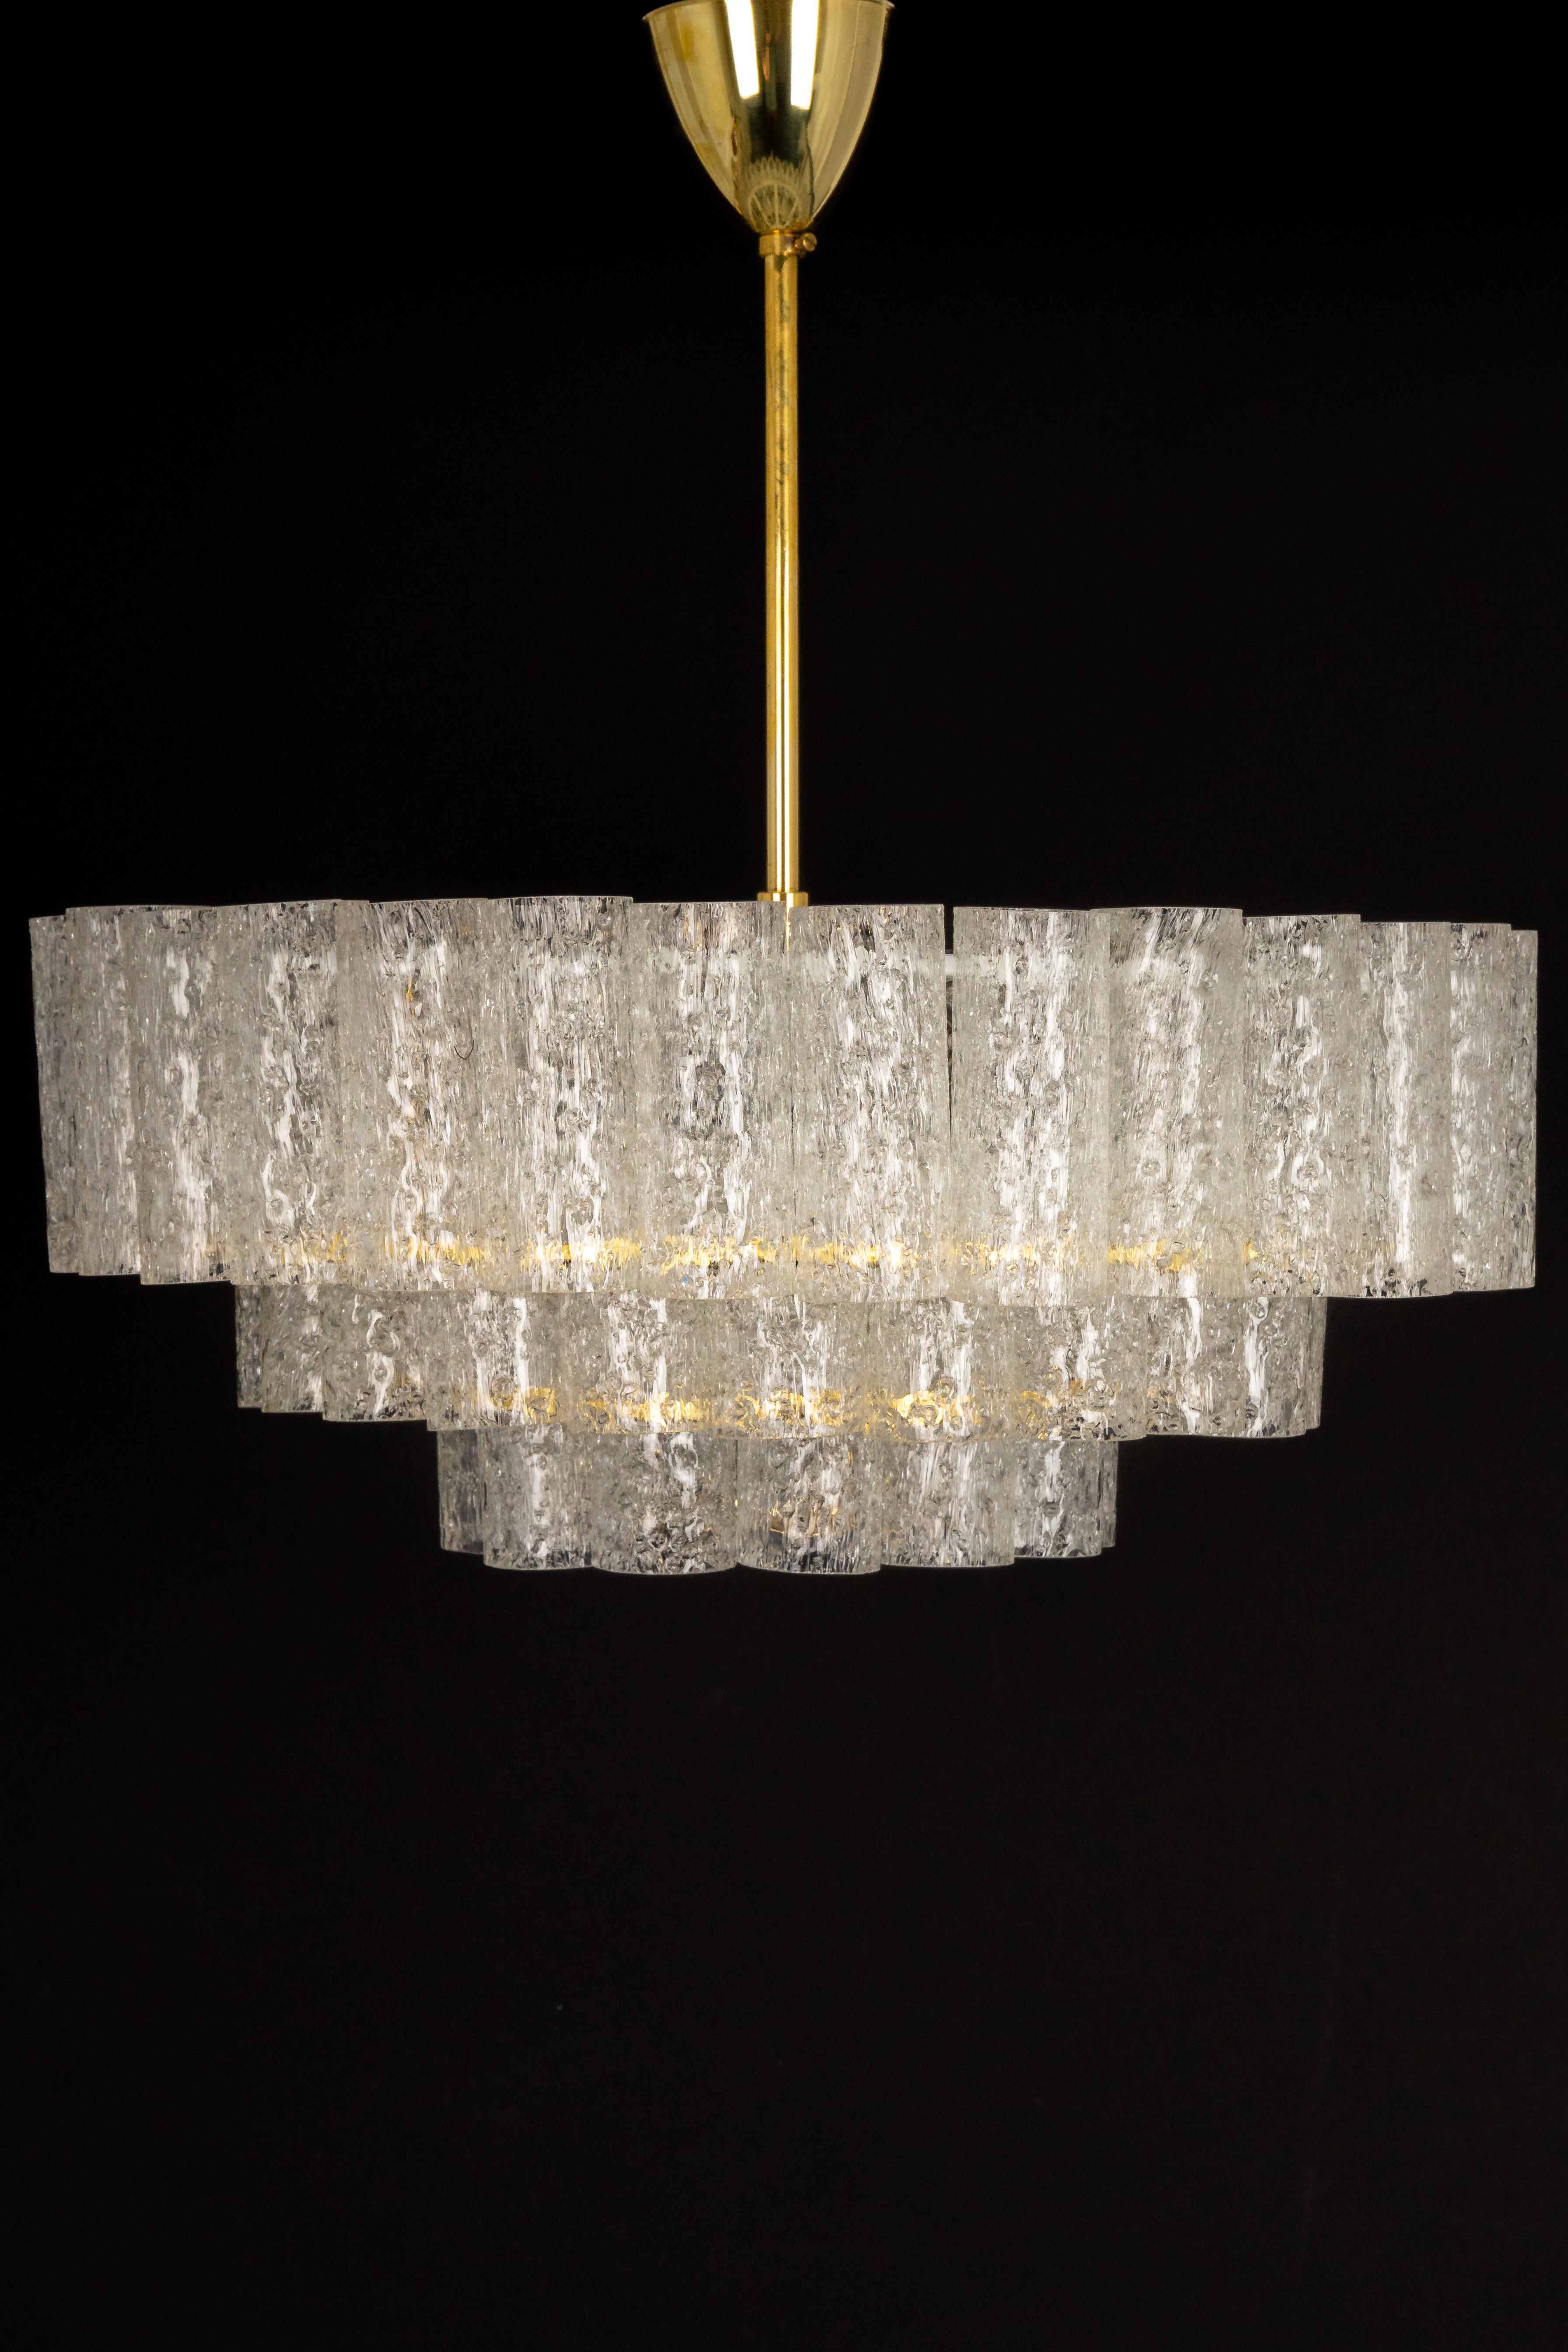 1 of 2 Stunning Murano Ice Glass Tubes Chandelier by Doria, Germany, 1960s For Sale 7